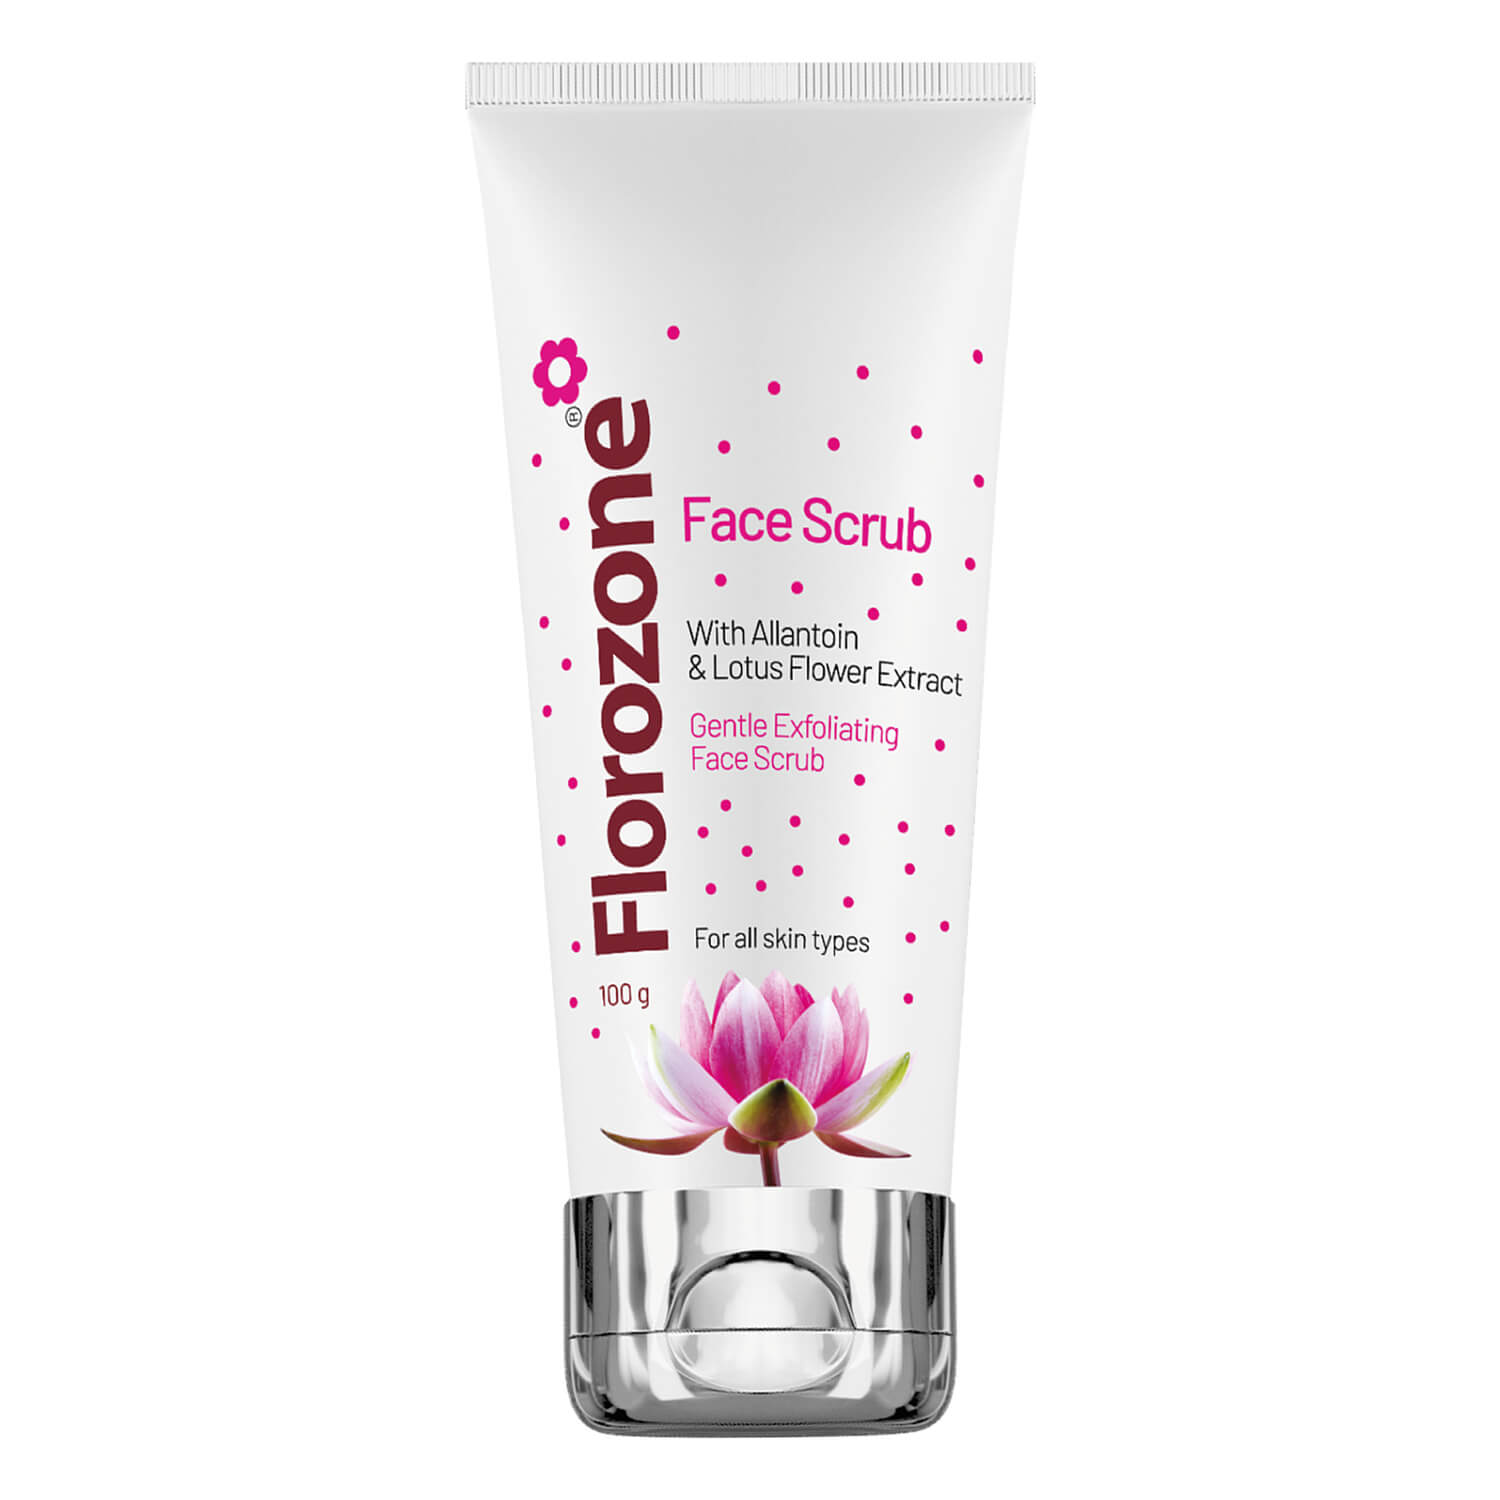 Florozone Face Scrub with Lotus Flower extract & Allantoin